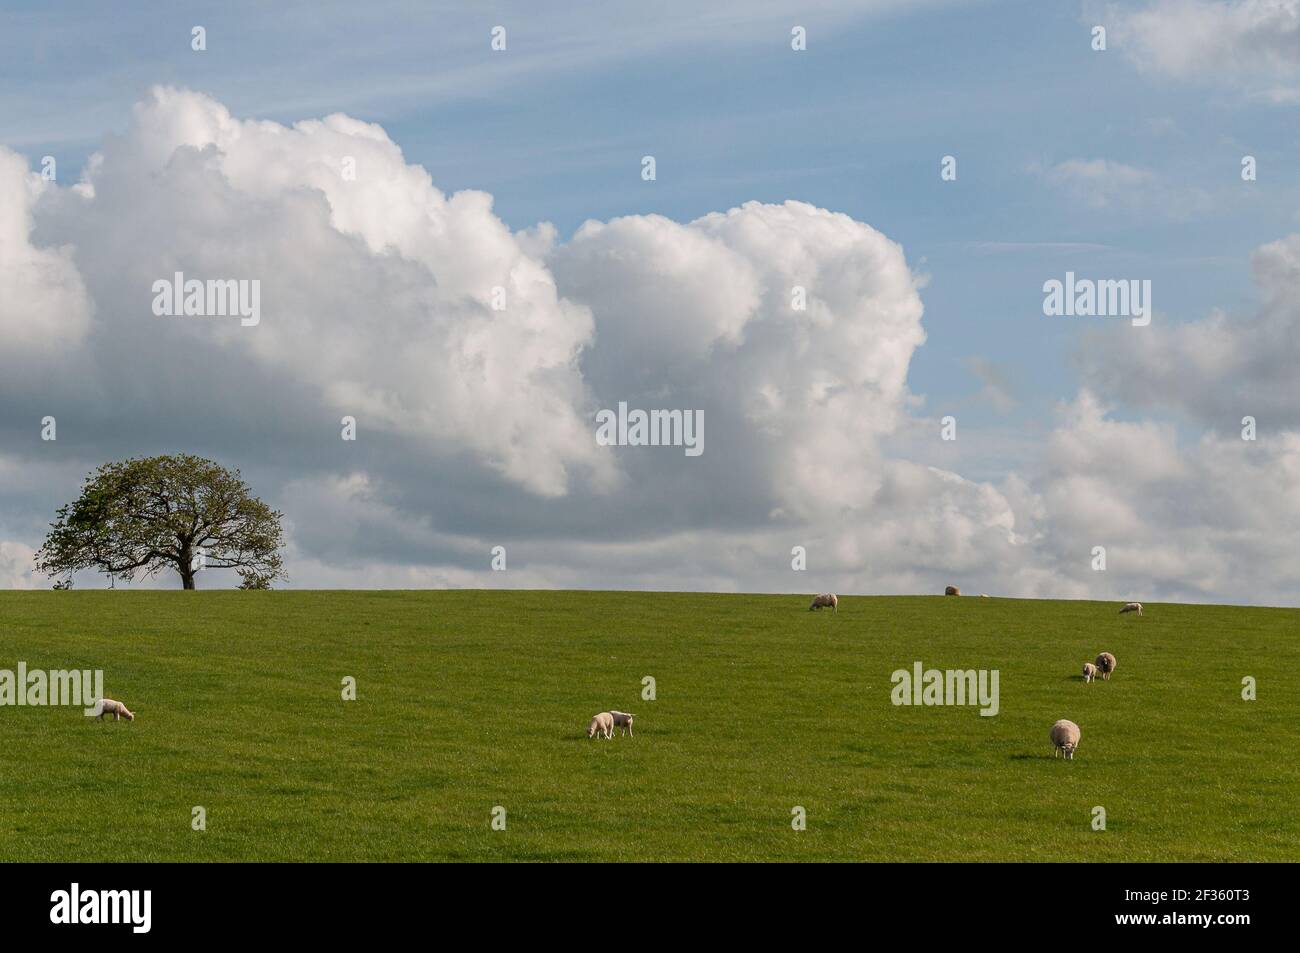 Flock of grazing sheep with lambs on a meadow with solitary tree in the background, Scotland. Concept: animal life, national symbol, life on farms, wo Stock Photo